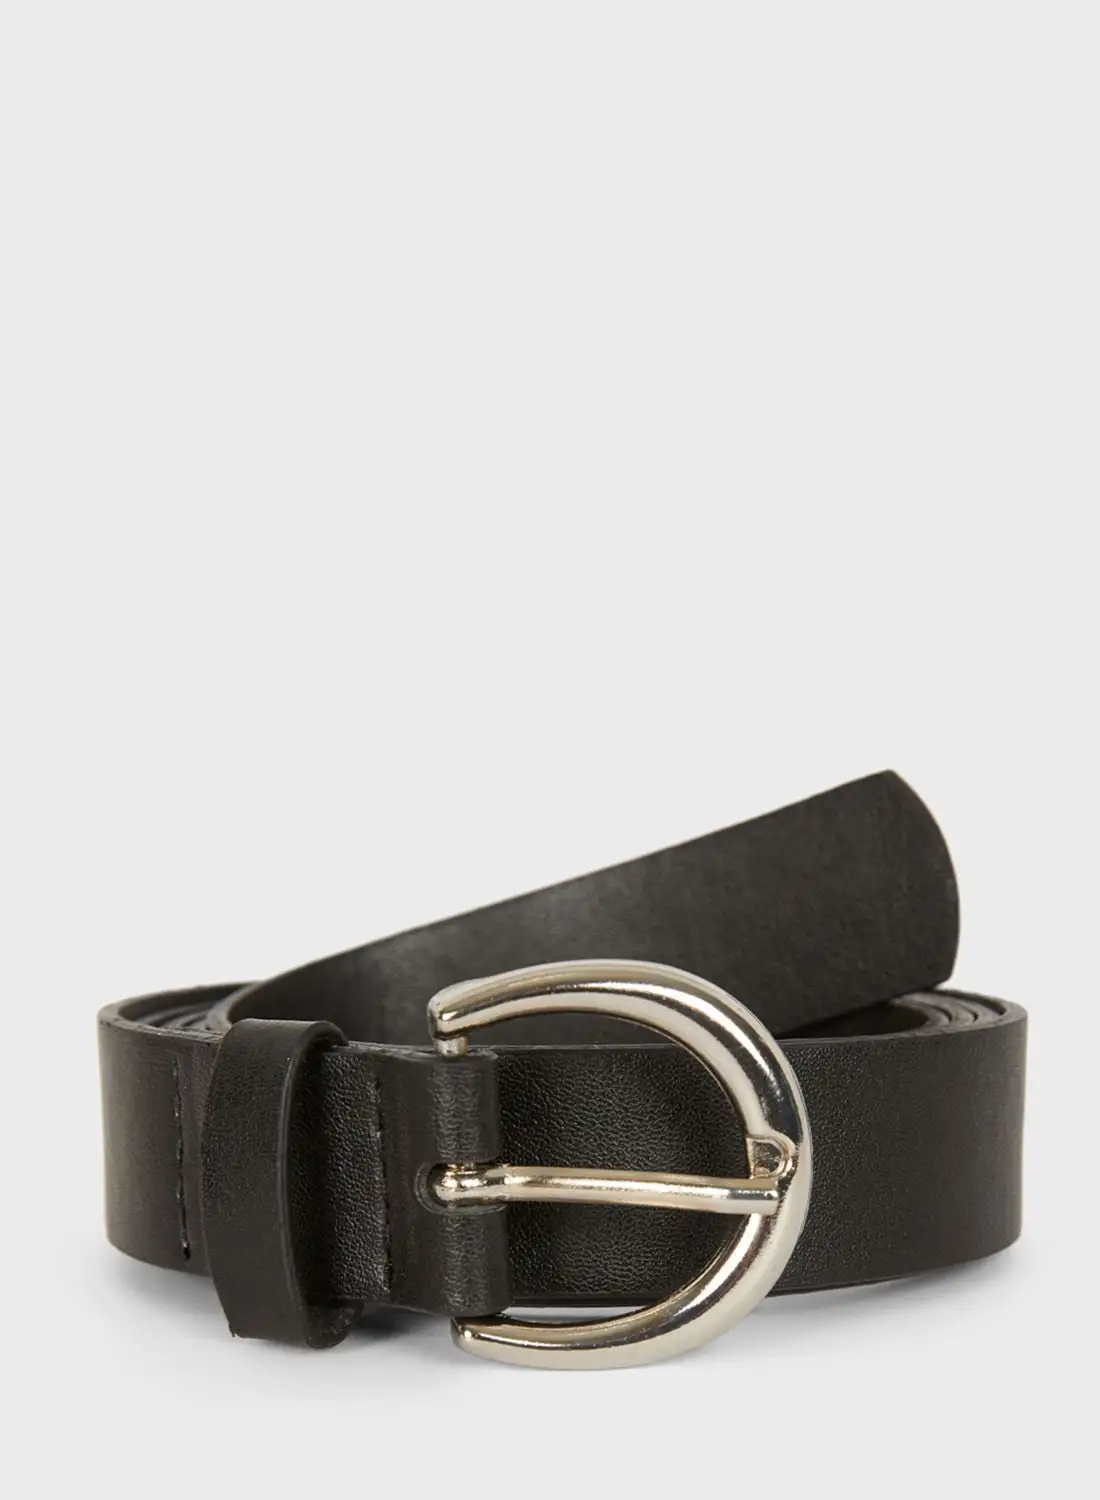 DeFacto Metal Buckle Allocated Whole Belt